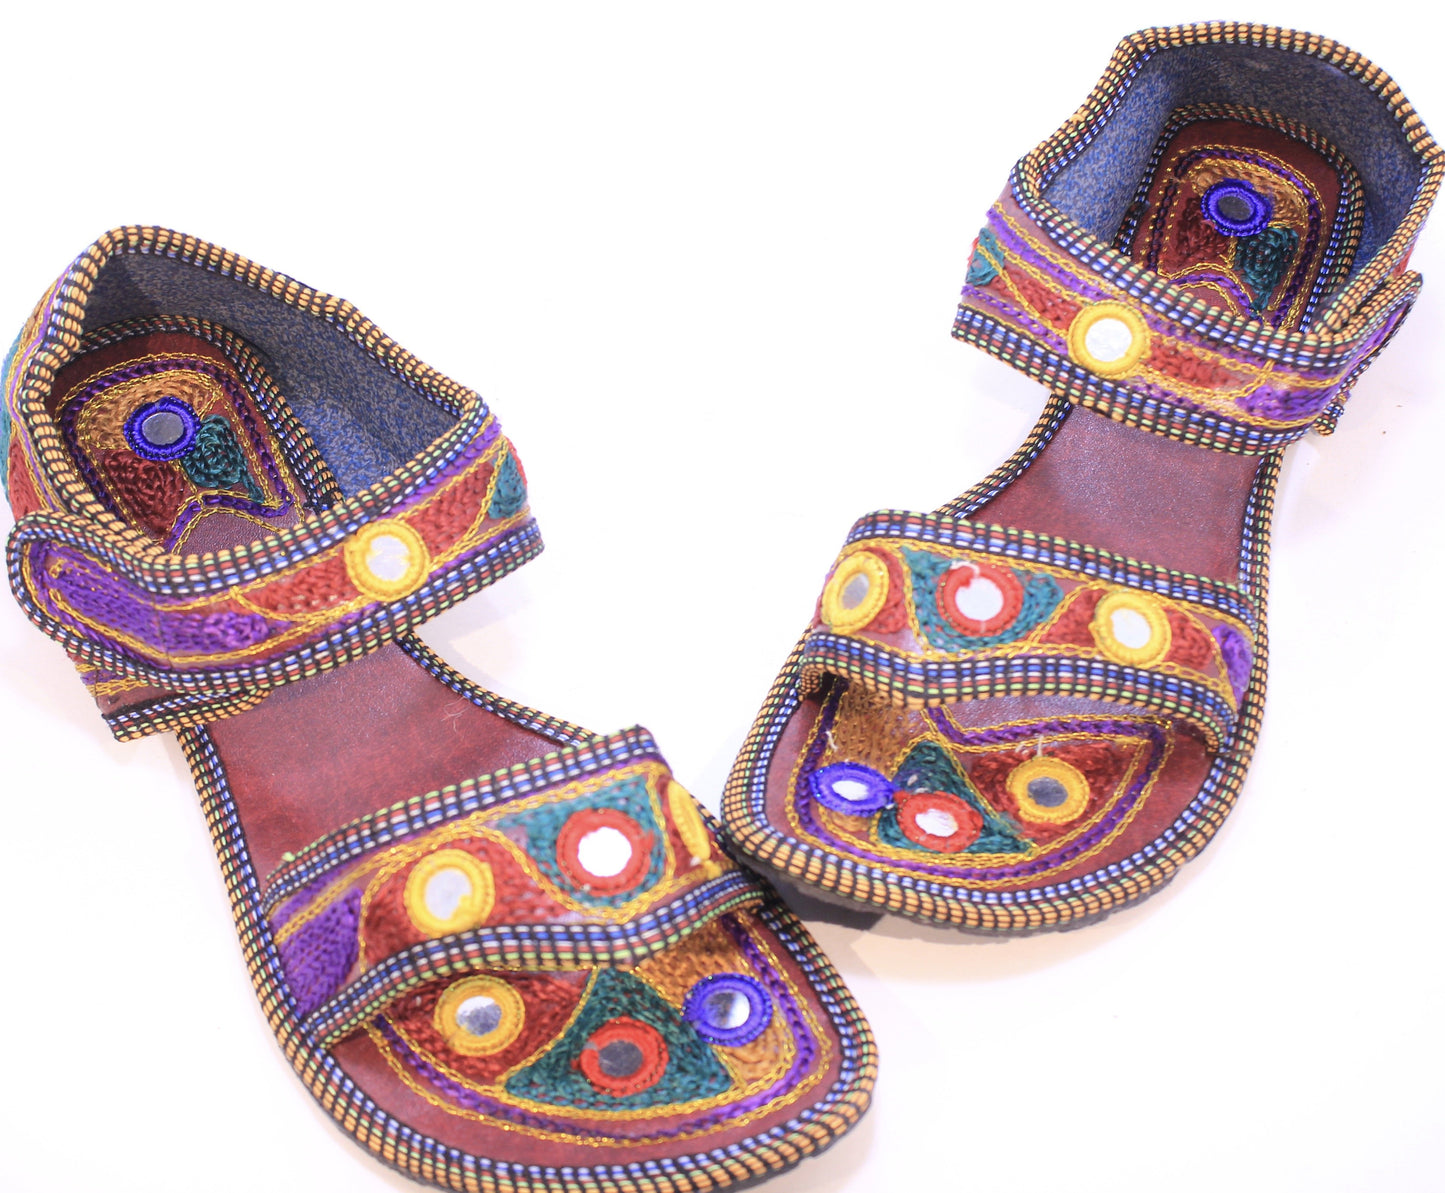 Hand Embroidered Sandals from India.